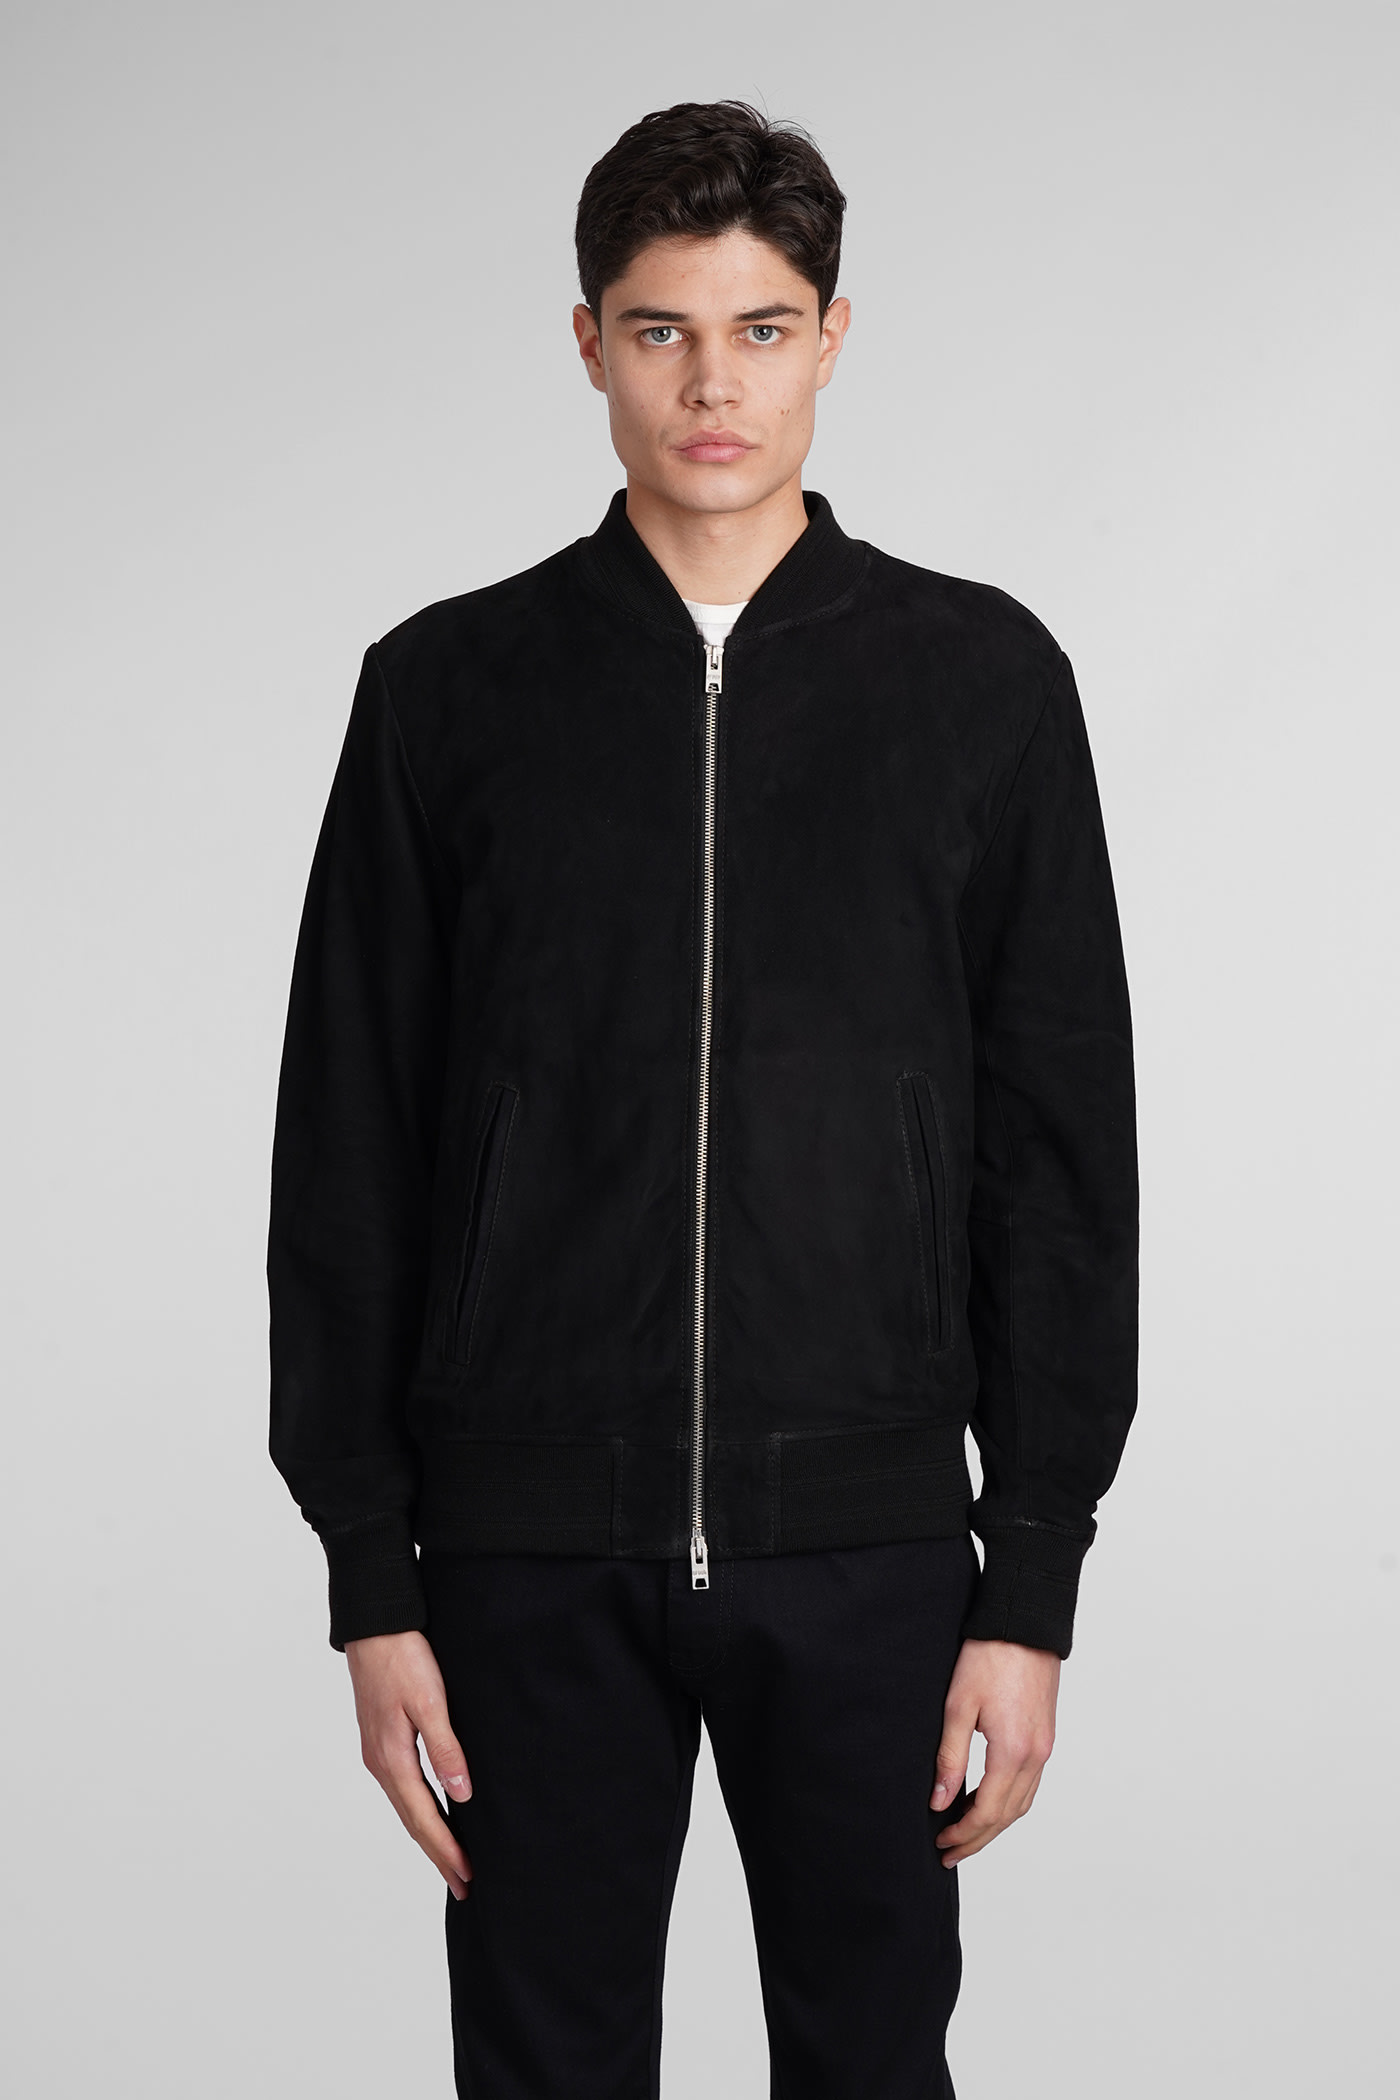 Dfour Leather Jacket In Black Leather